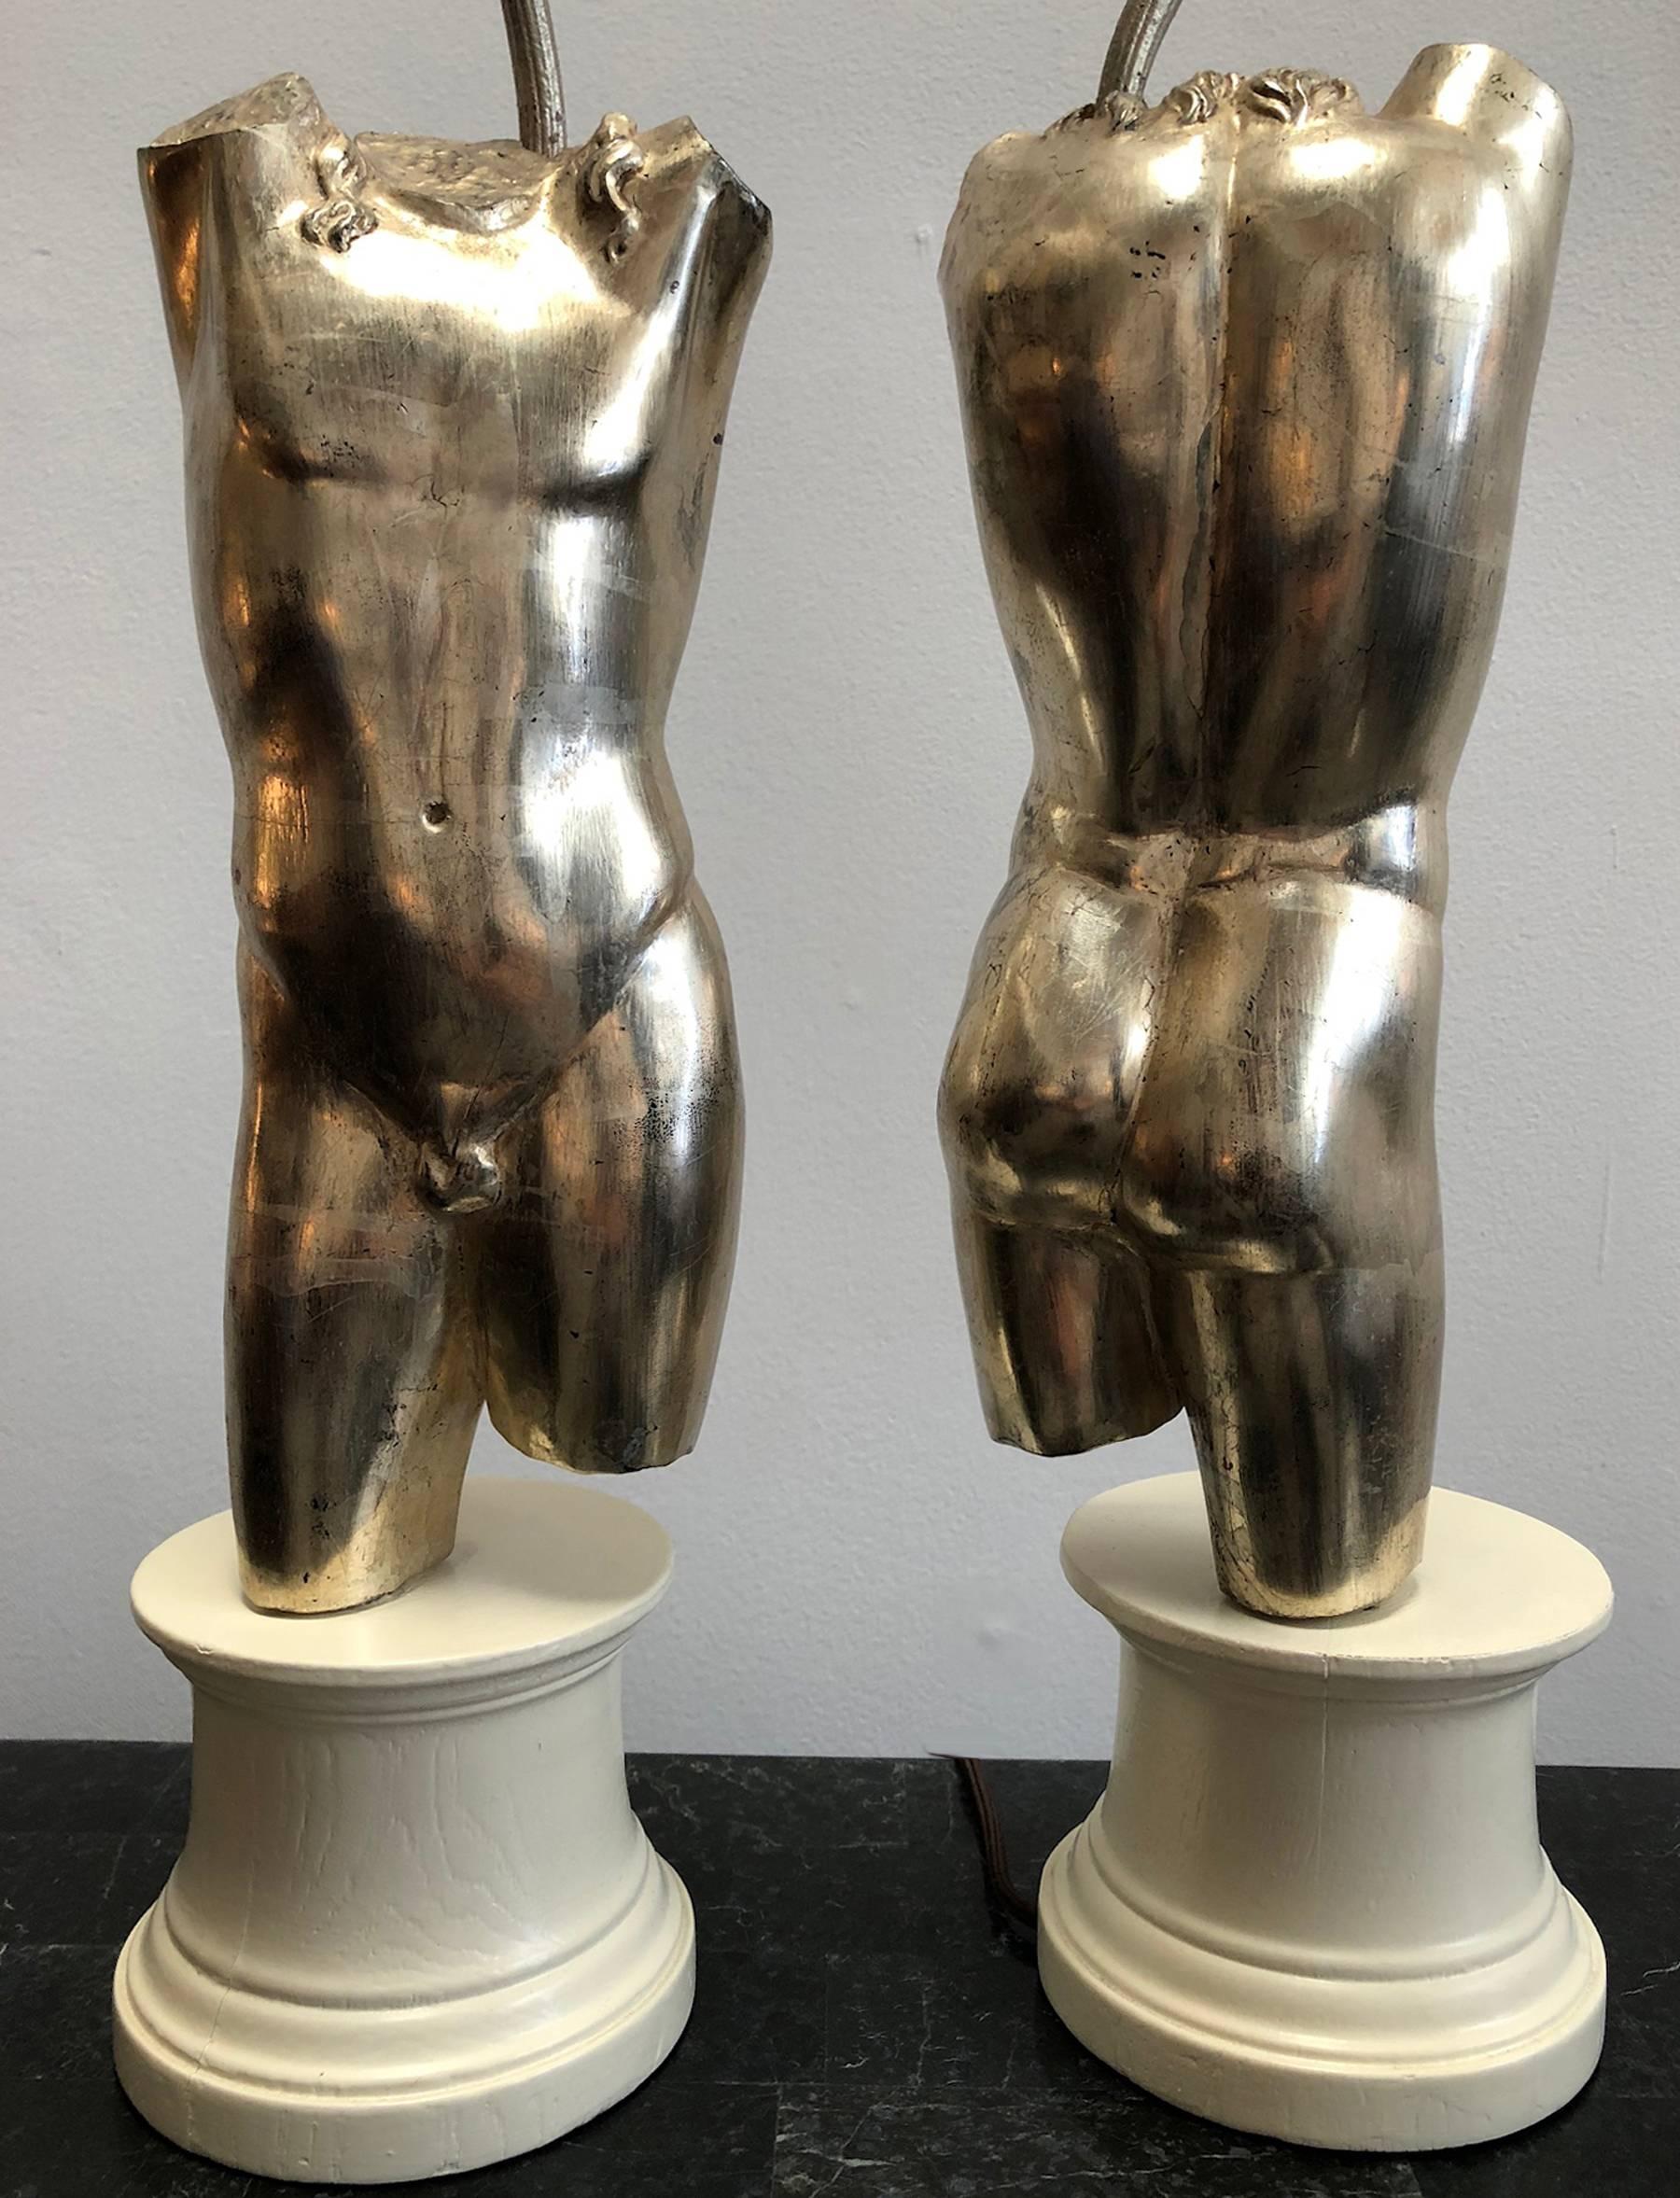 Pair of male torso lamps. Lacquered wood bases. Silver gilt finish. Classic look from the 1960s.

Complementary delivery in the Los Angeles / Beverly Hills area and Pasadena area. Pick up is also an option.
